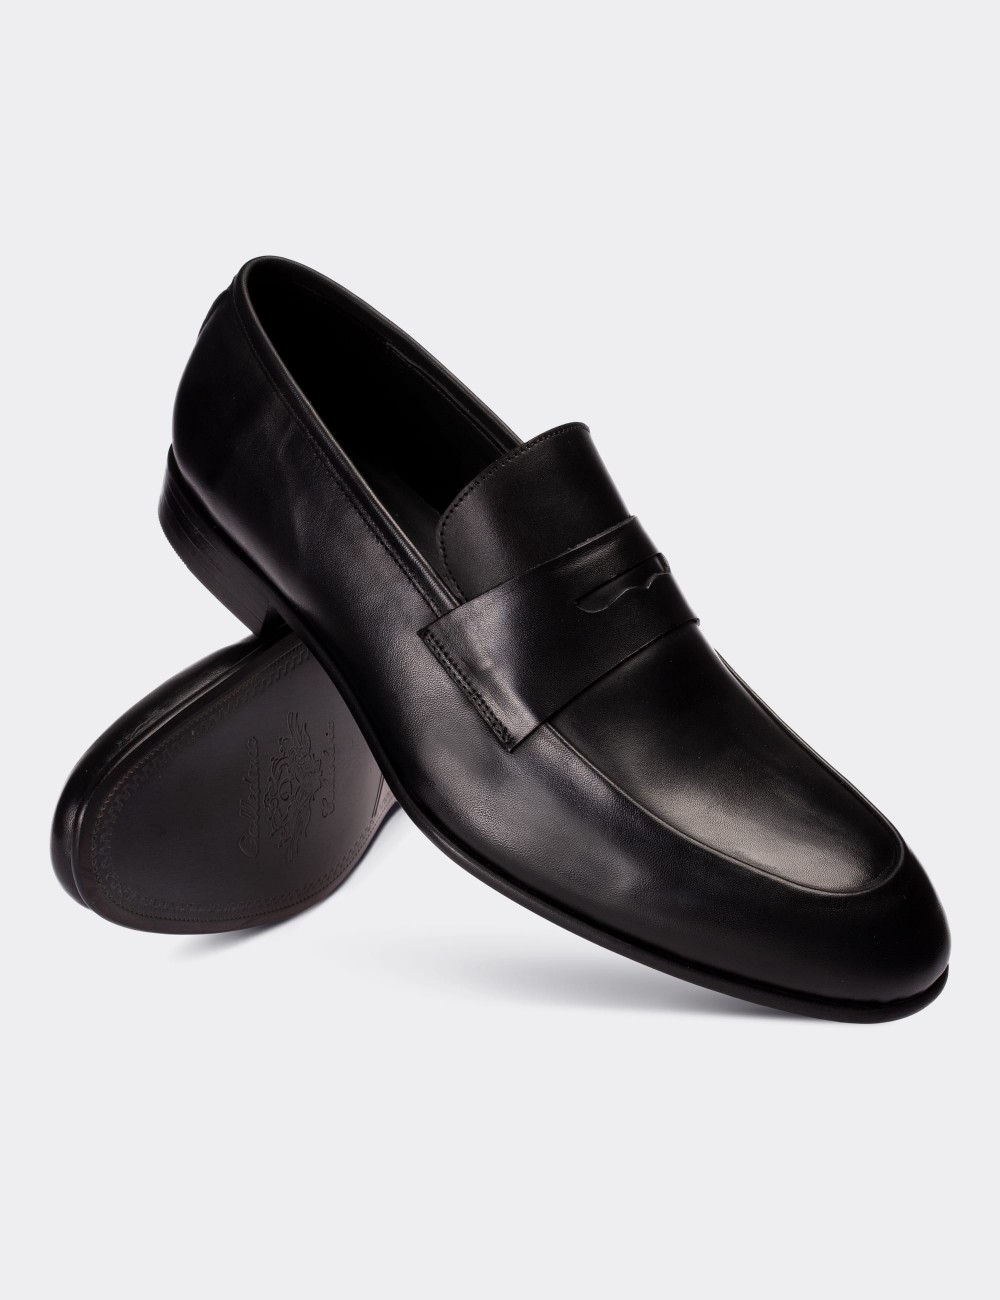 Black  Leather Classic Shoes - 01809MSYHM01